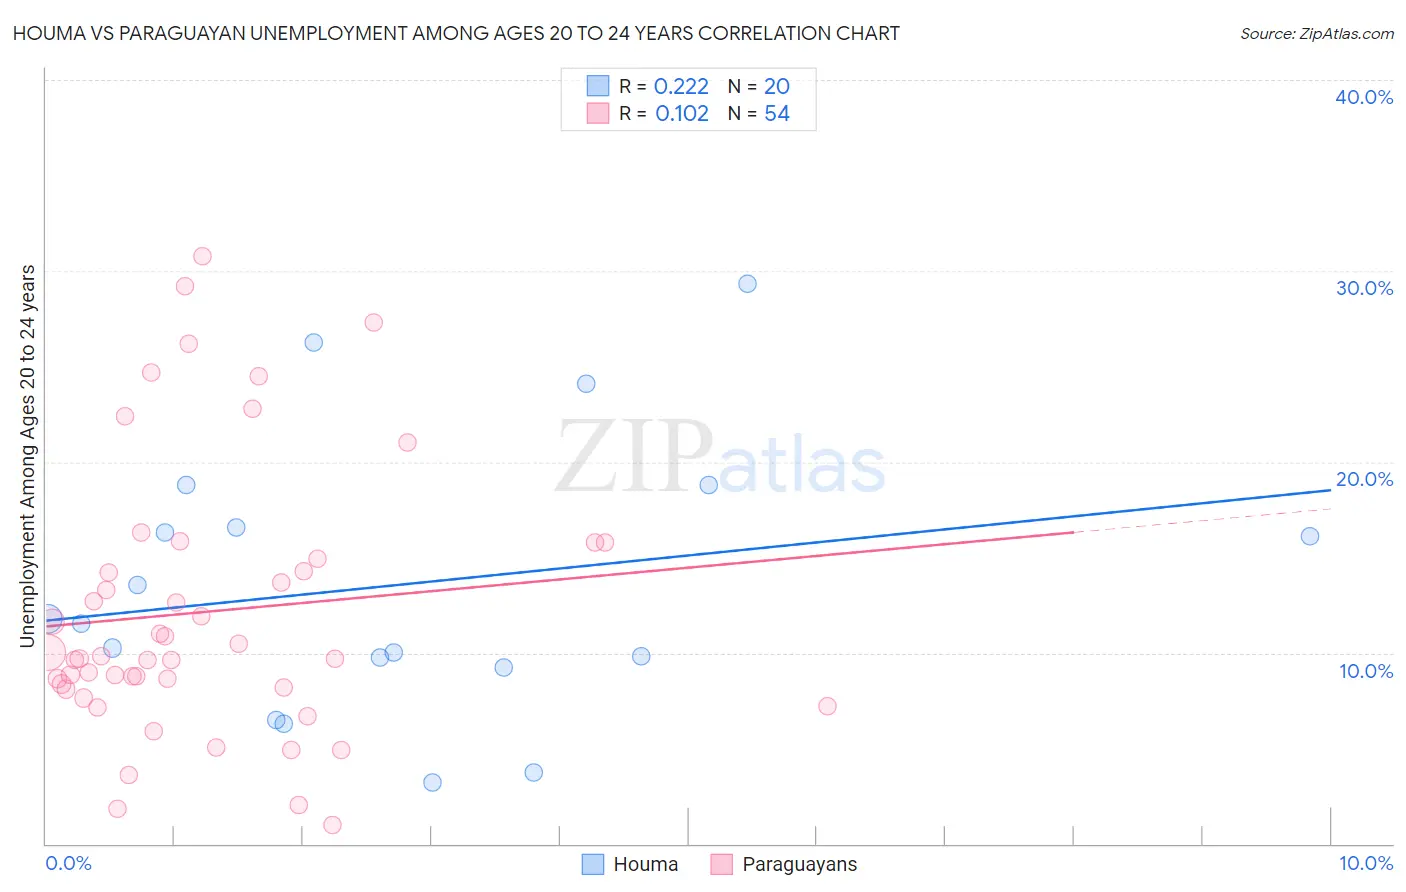 Houma vs Paraguayan Unemployment Among Ages 20 to 24 years